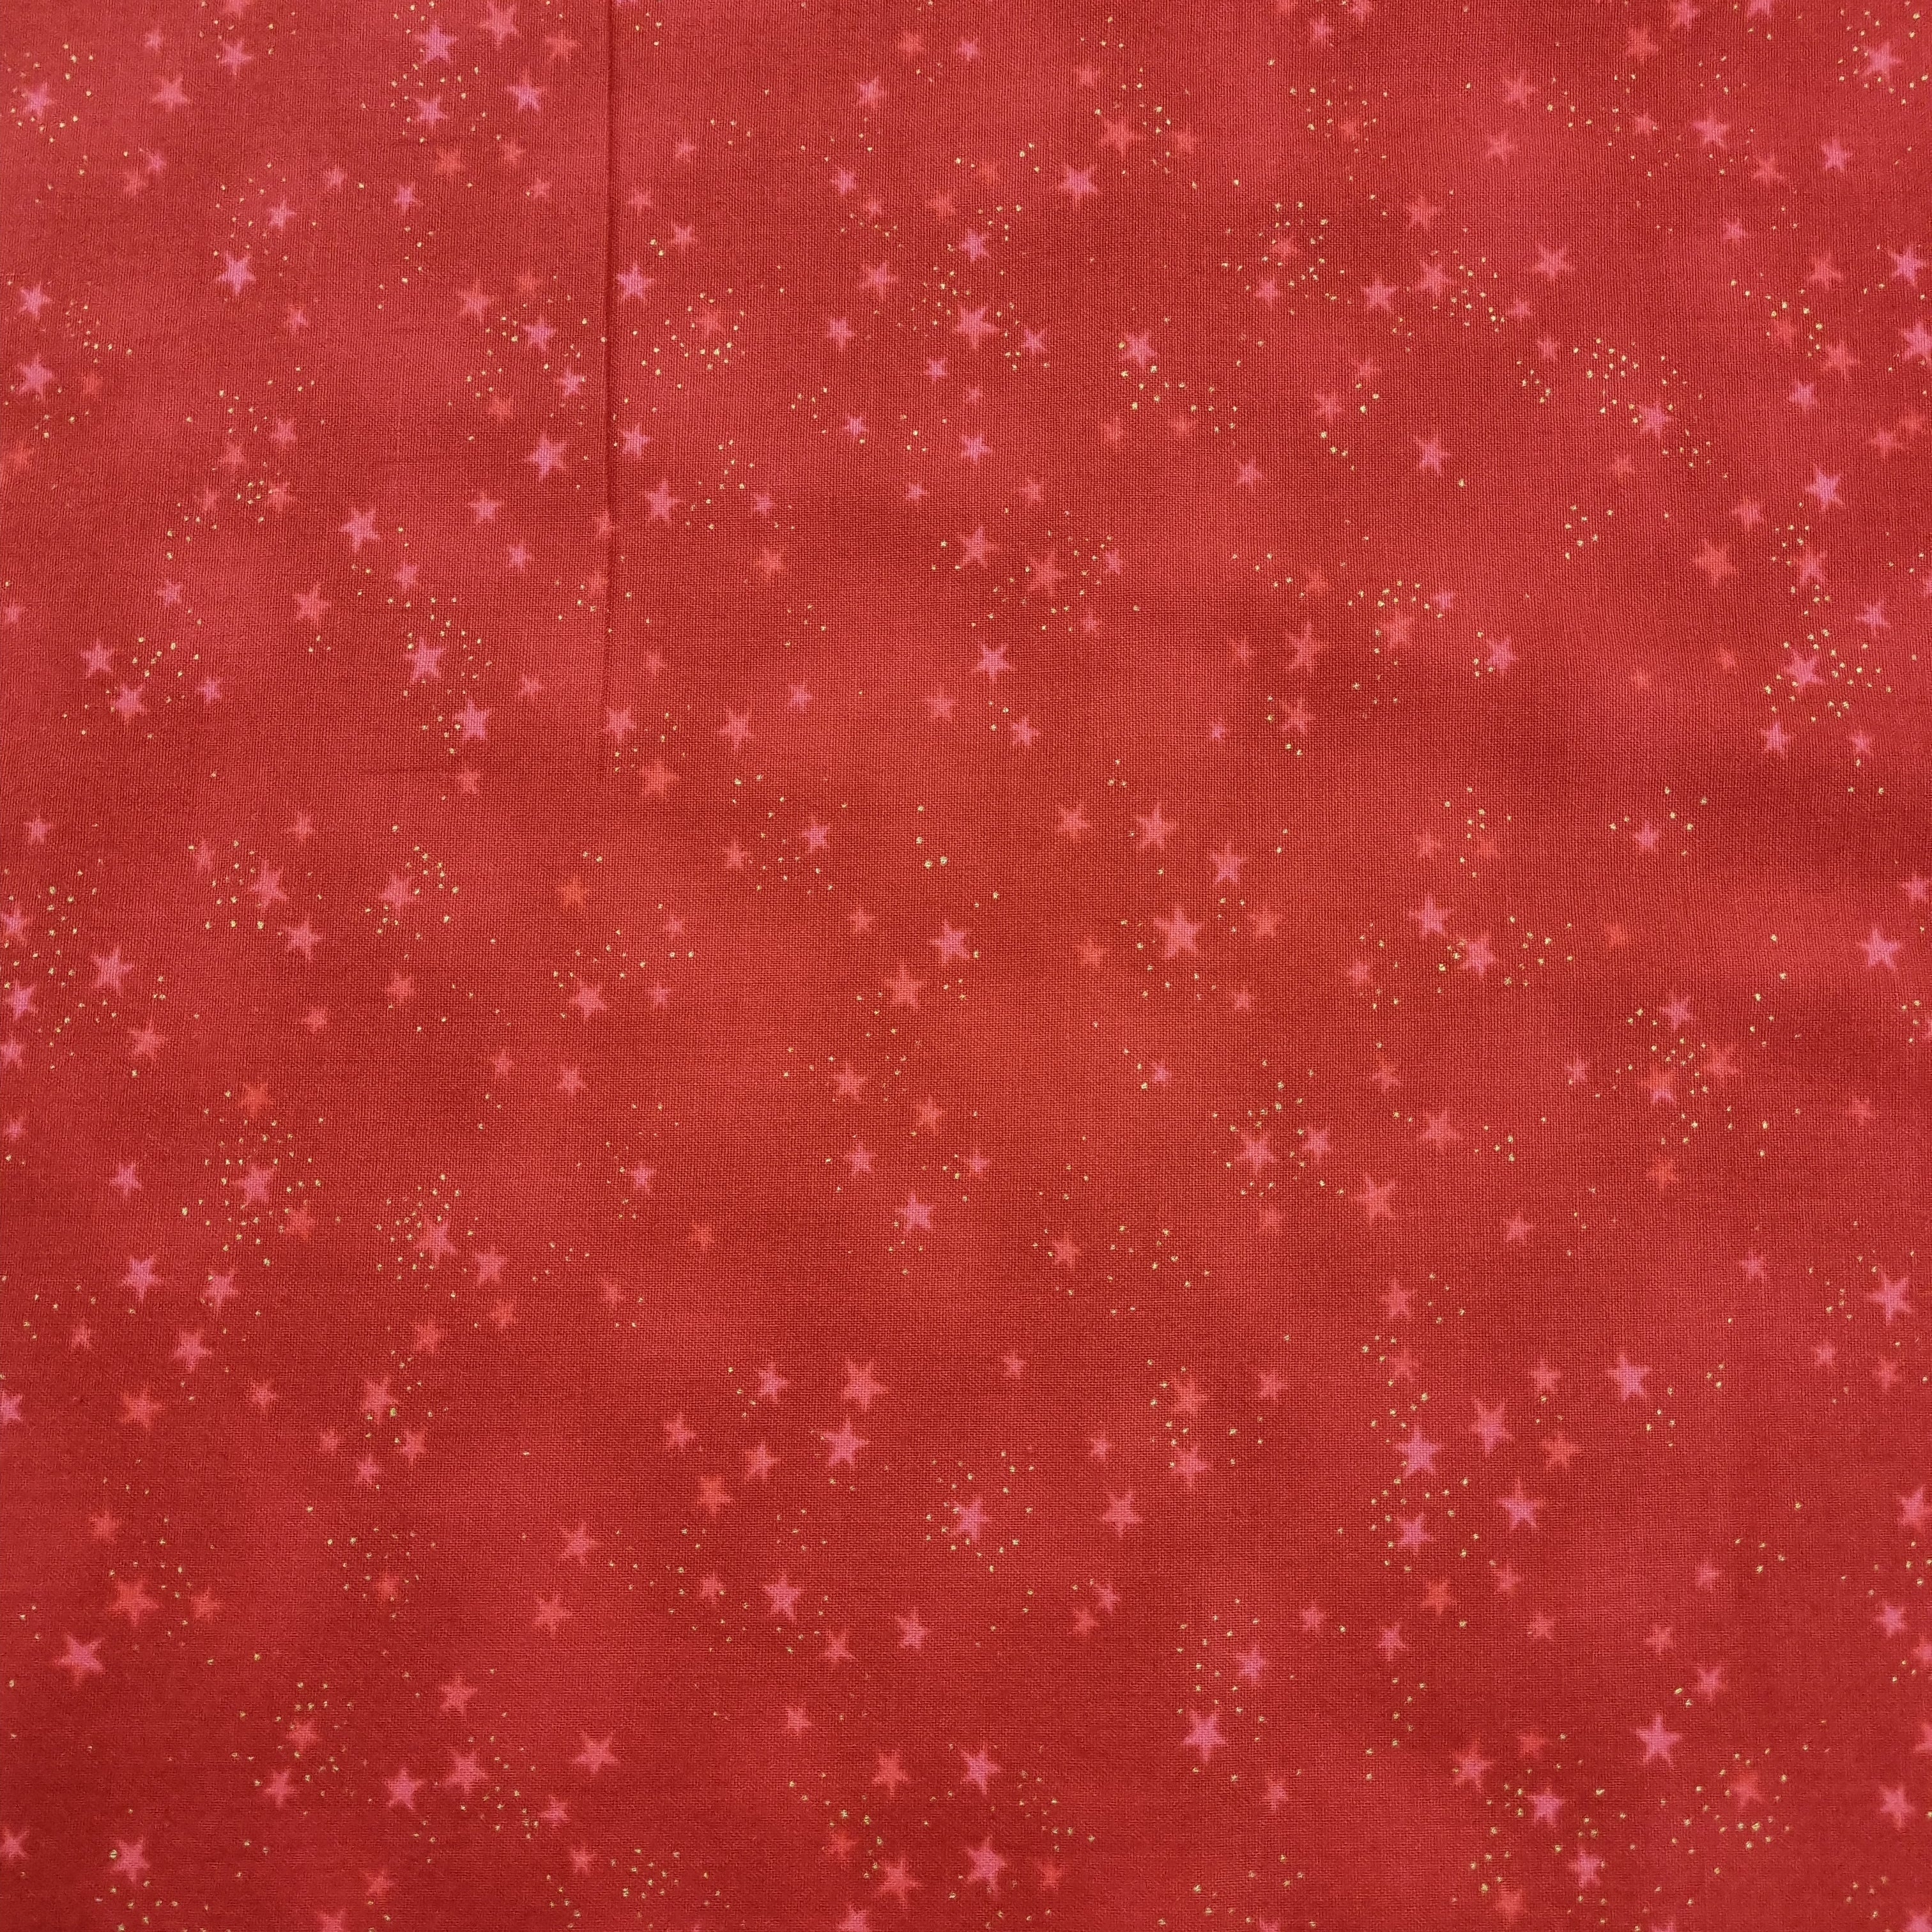 Red Stars - gold dots